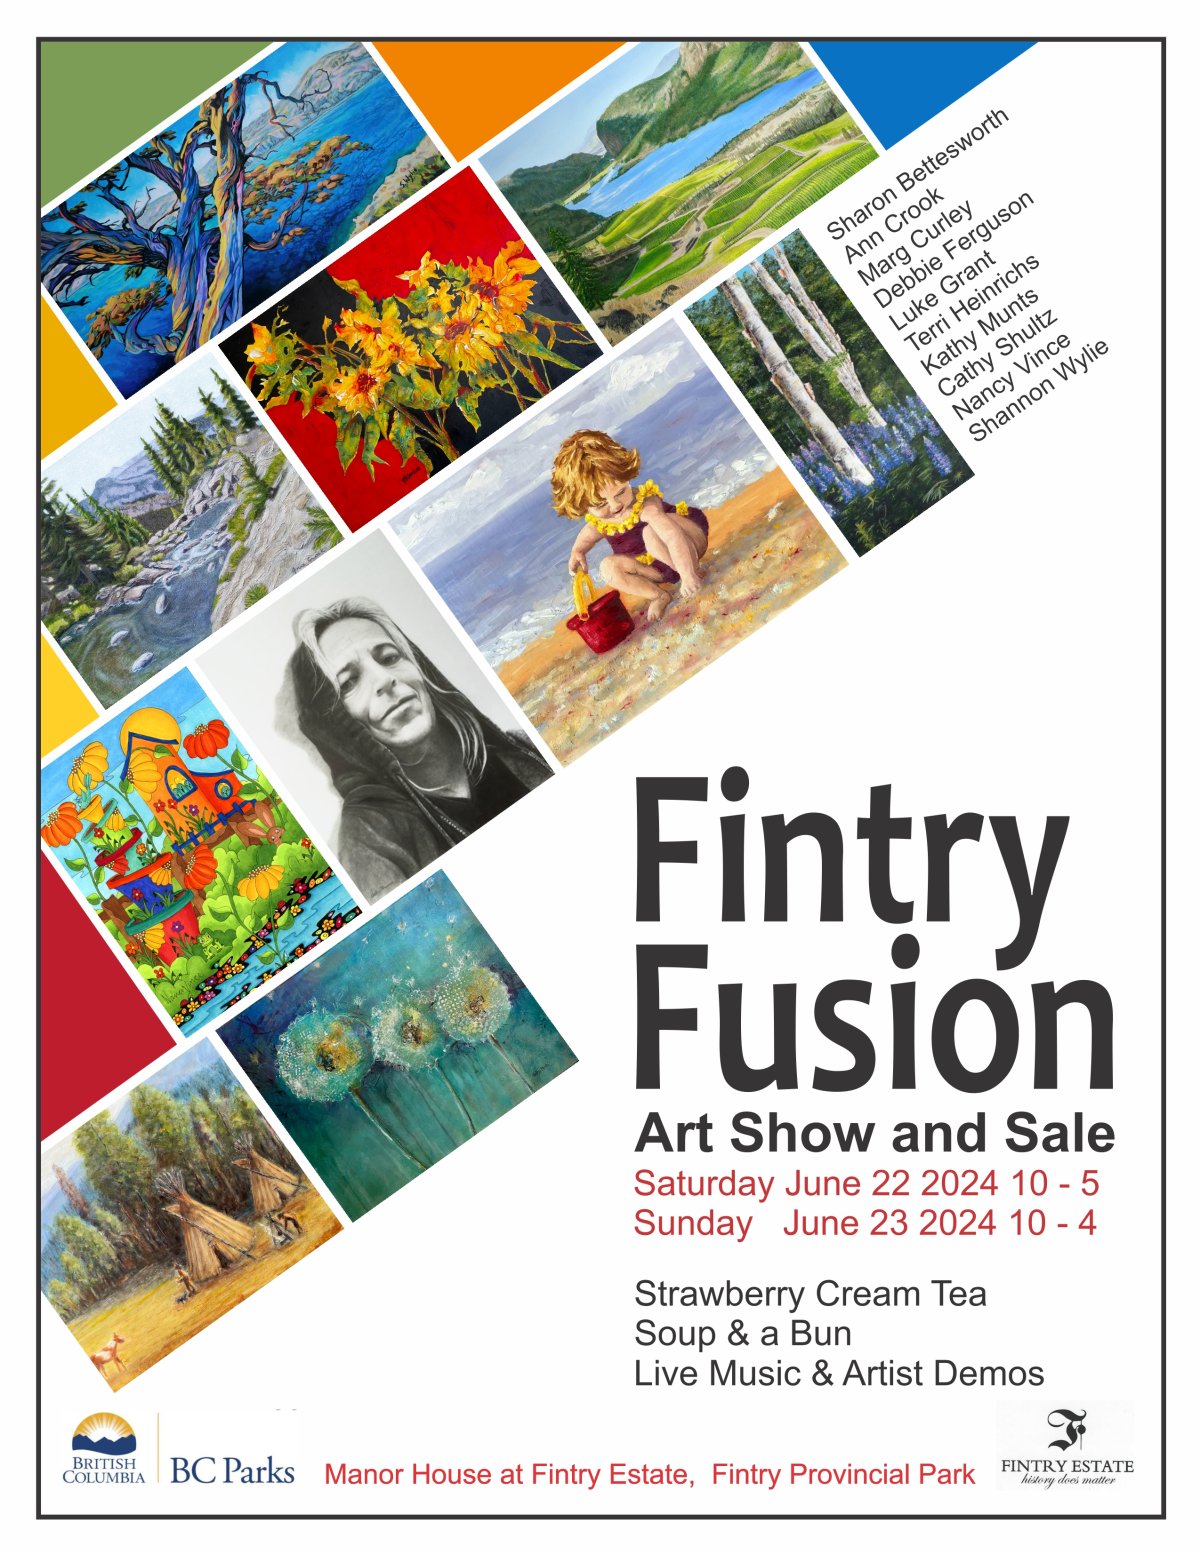 FINTRY FUSION ART SHOW AND SALE - image